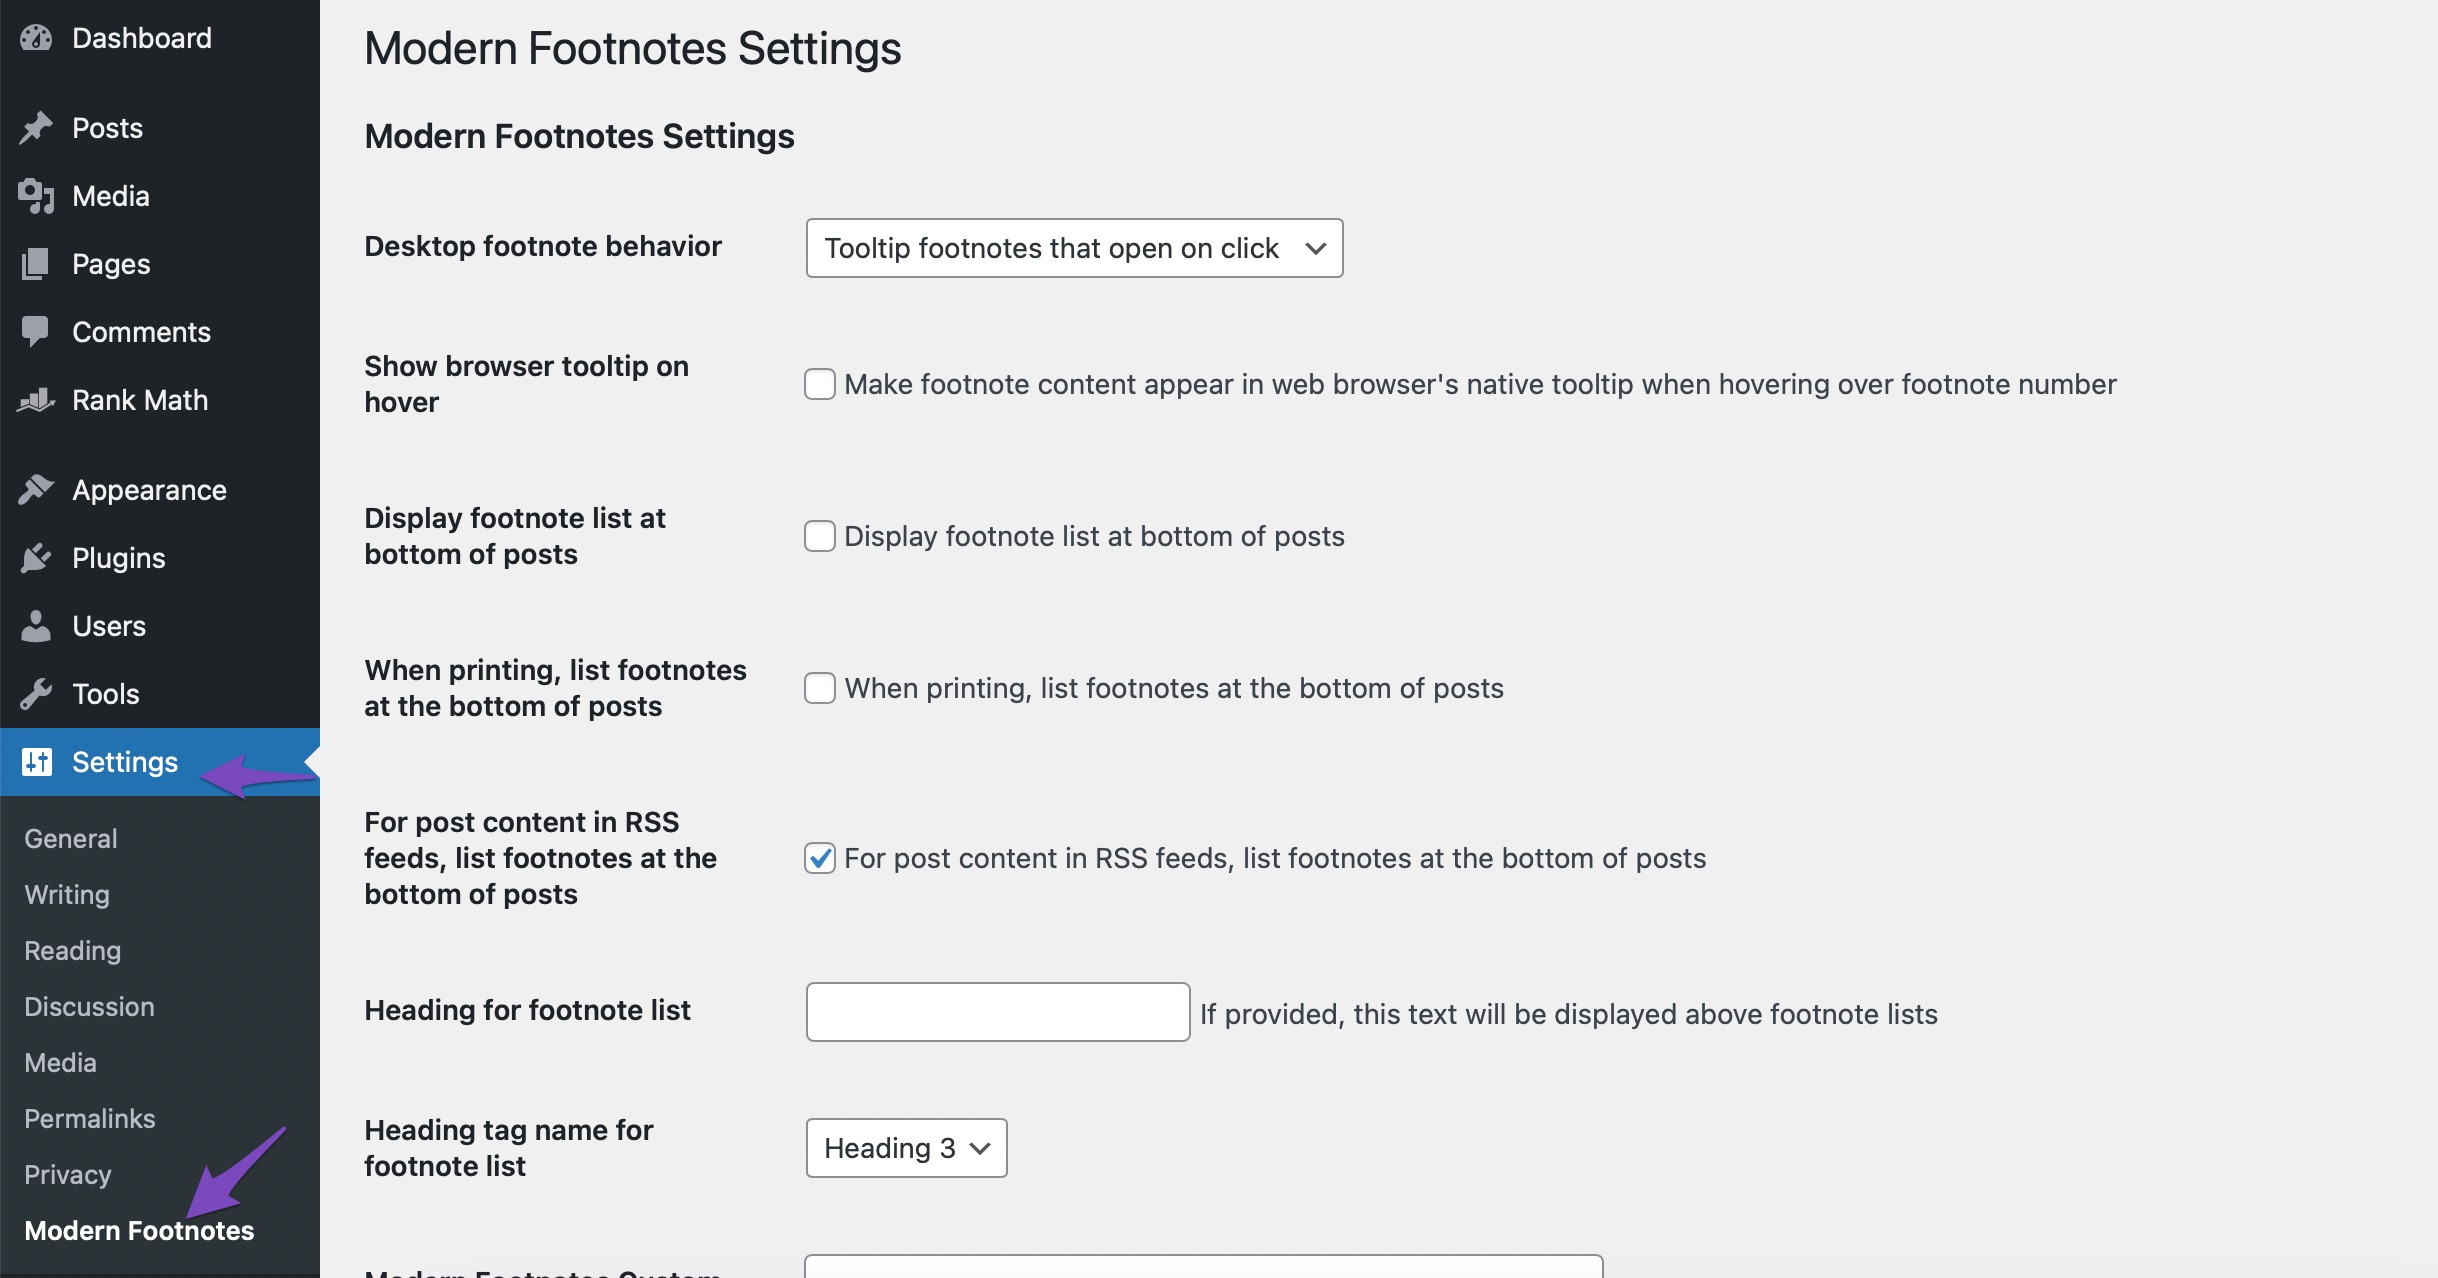 Modern Footnotes settings